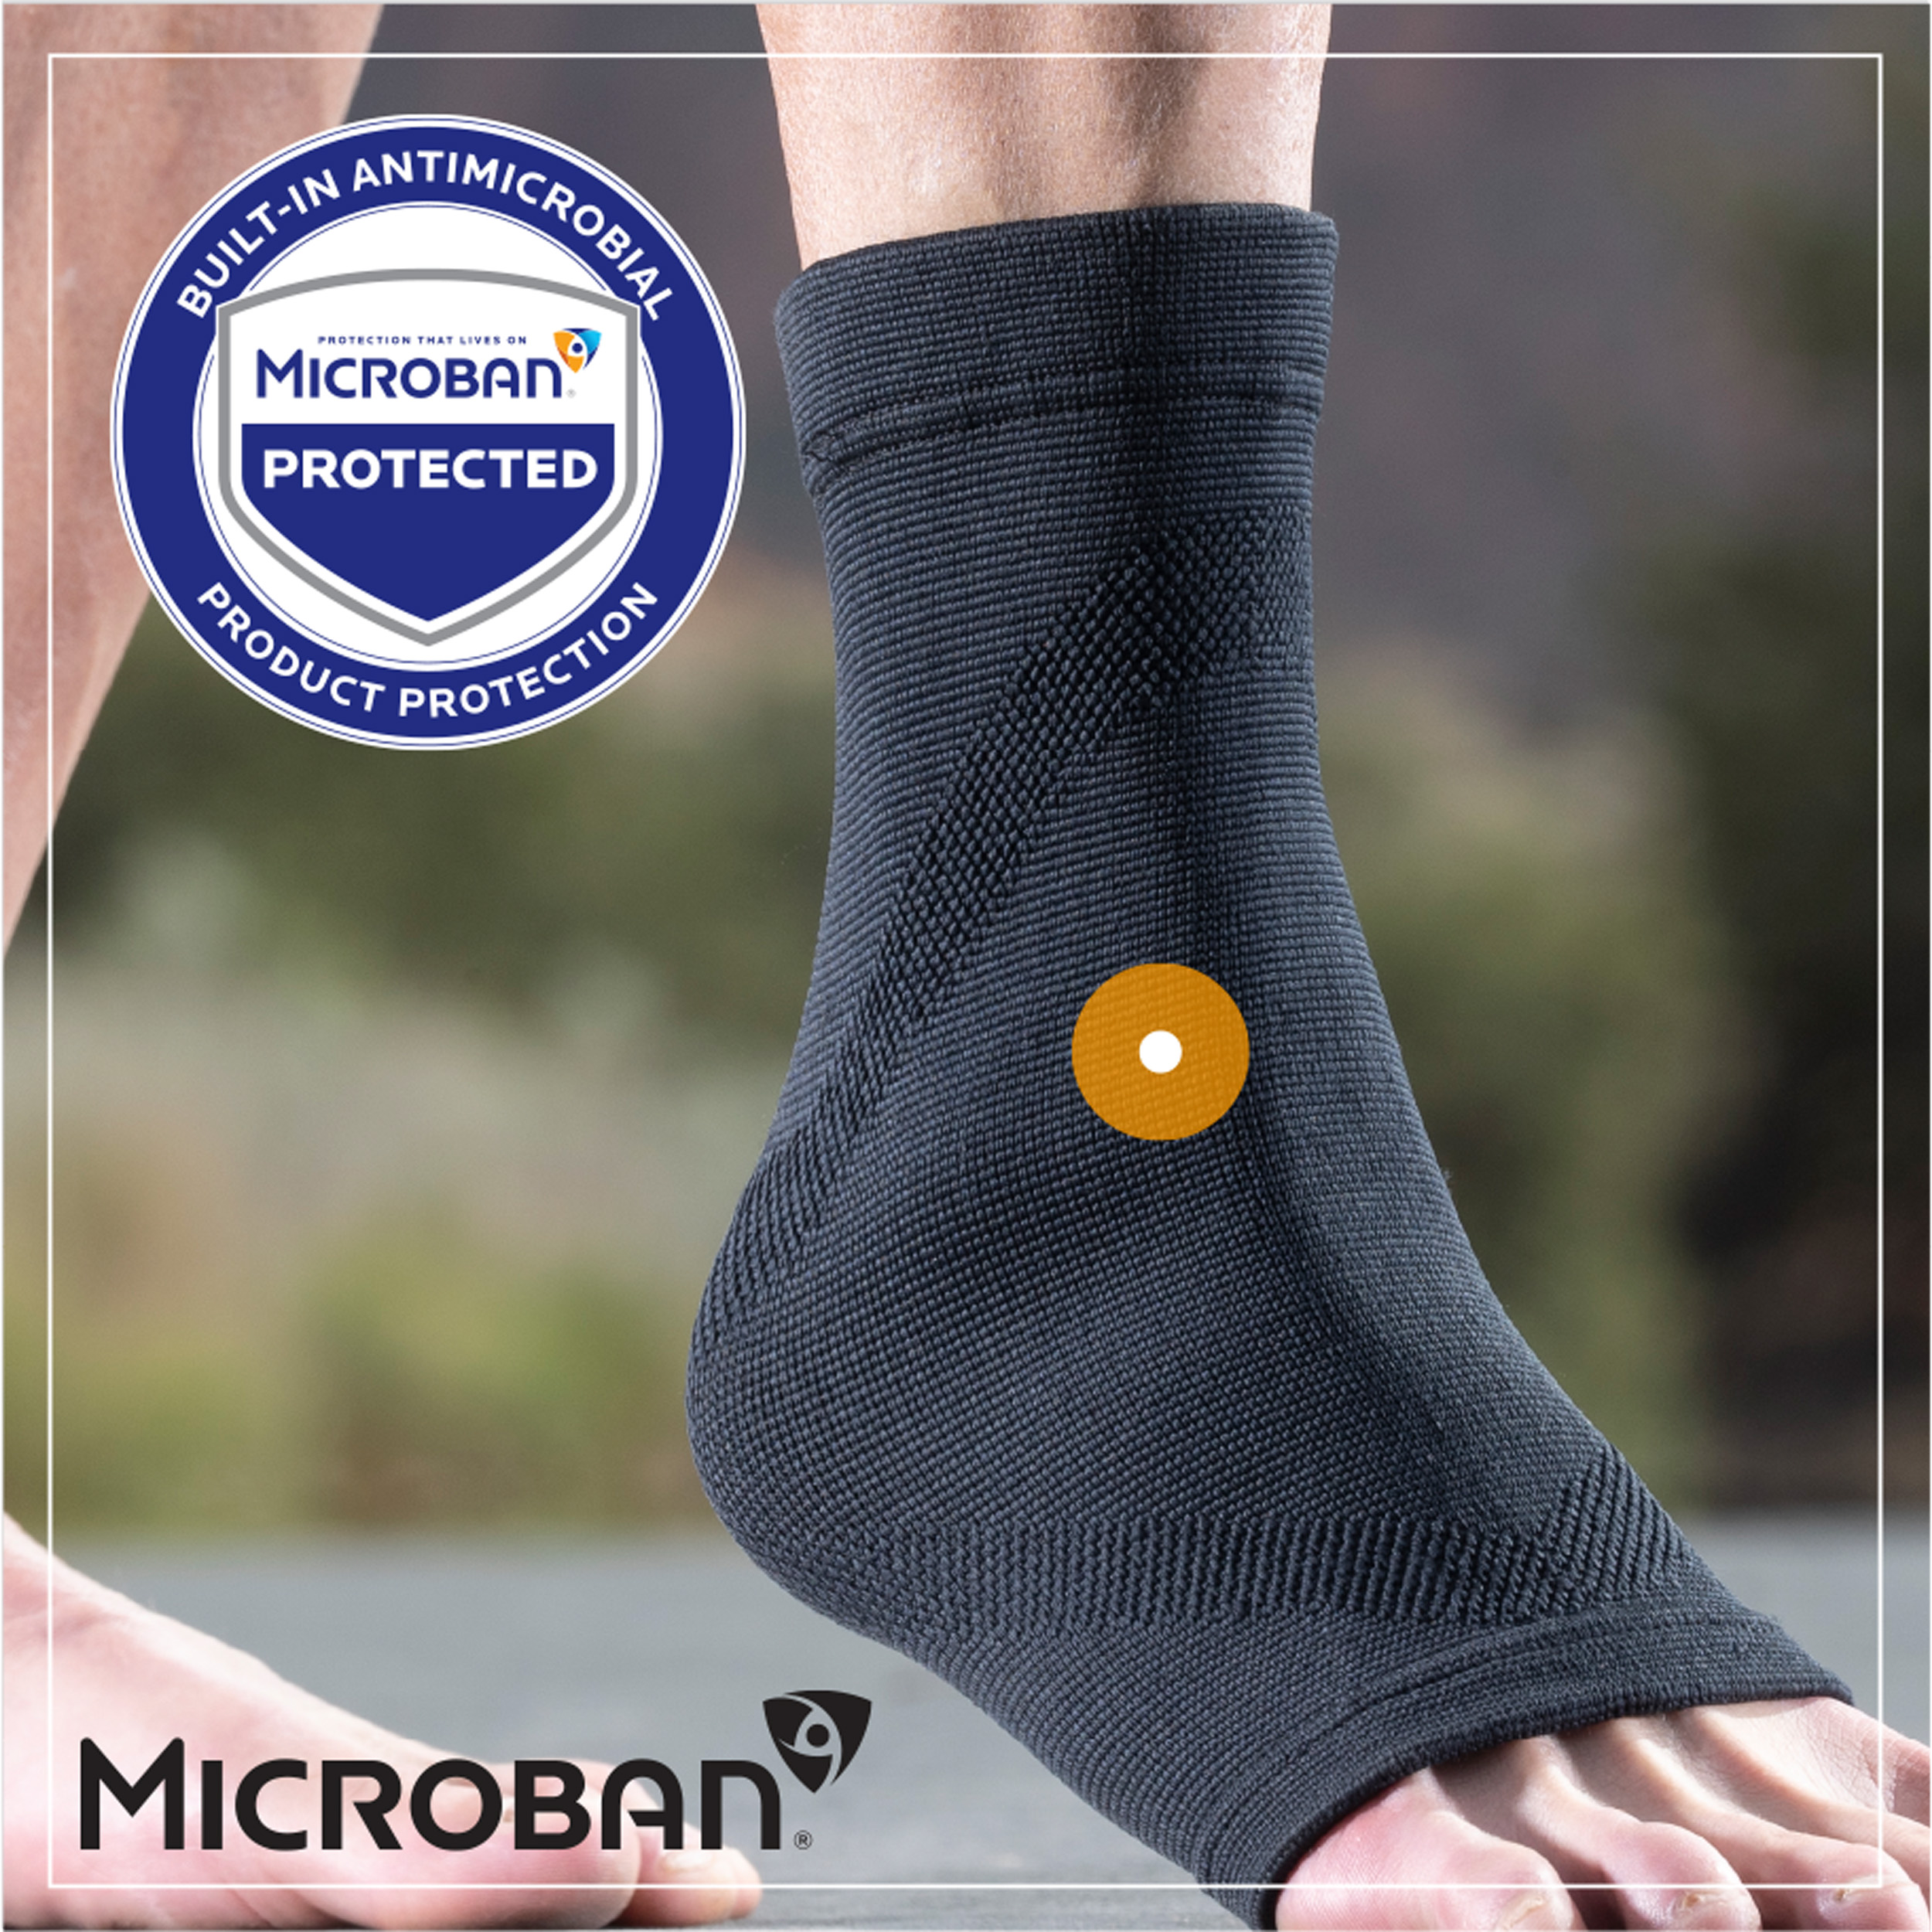 microban on ankle